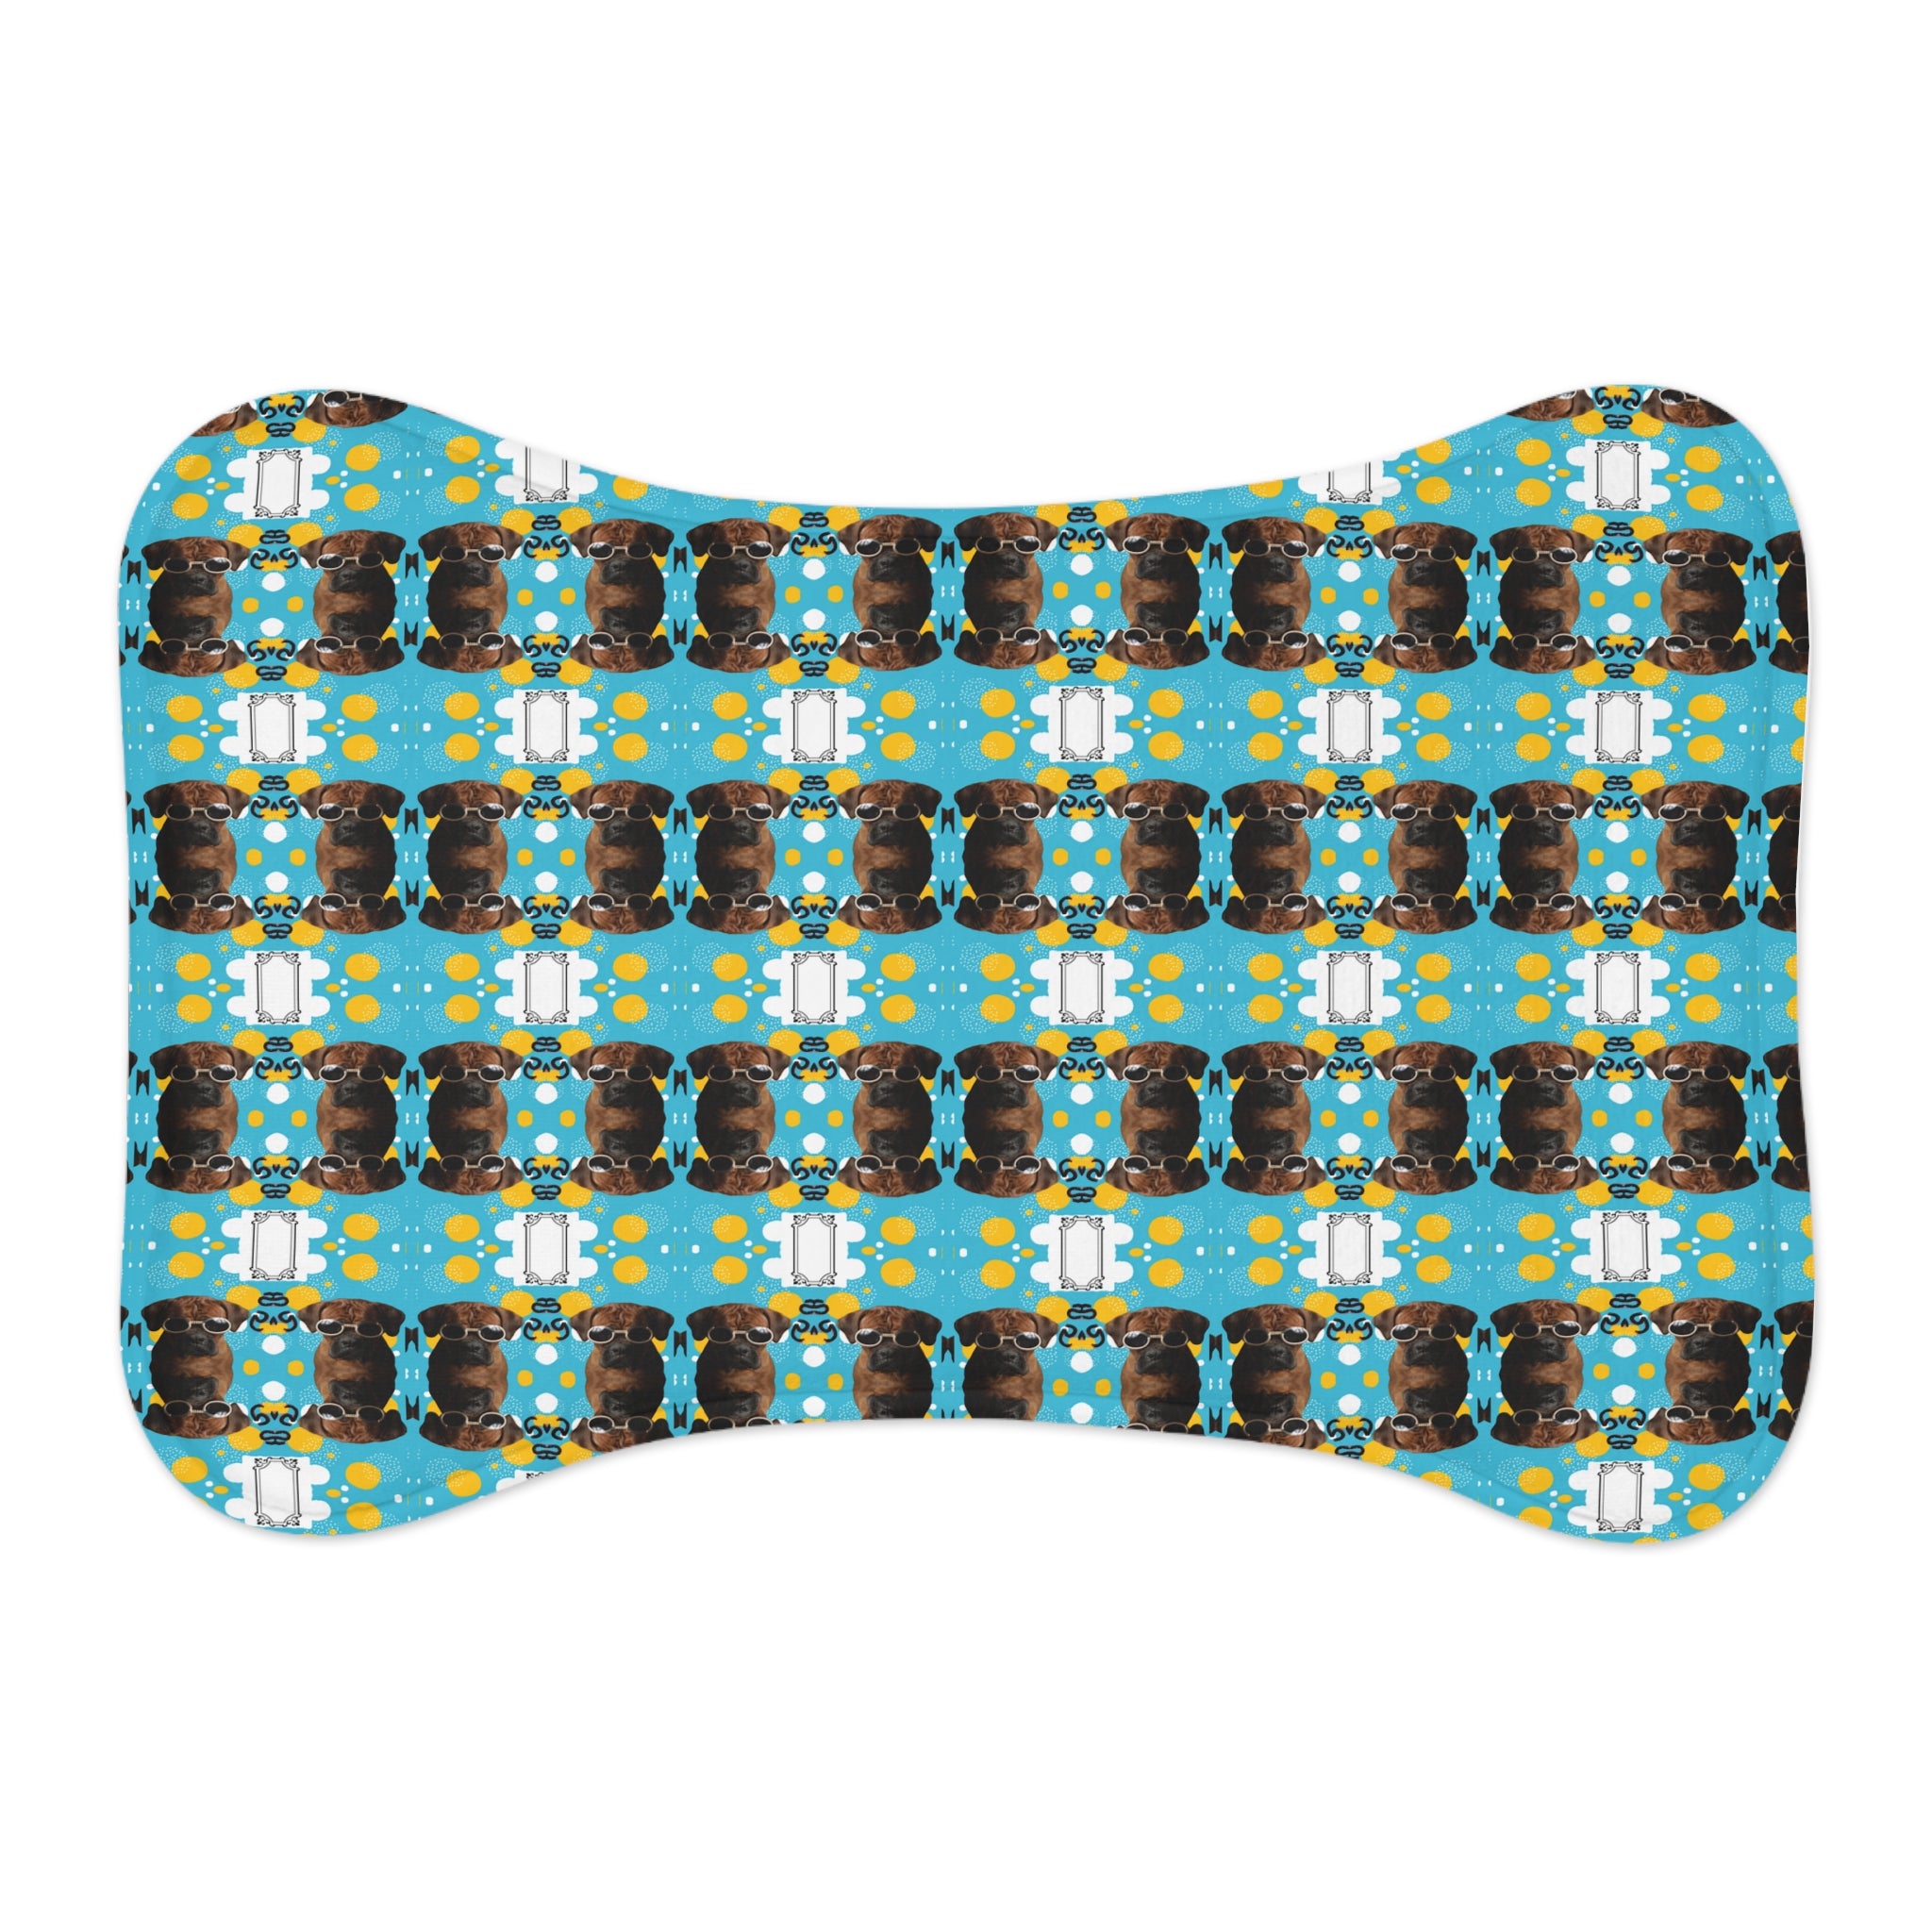 Cool Labrador with Sunglasses pattern. Part of the "Where's the doggie?" series by Poochbliss pet dog Feeding Mat